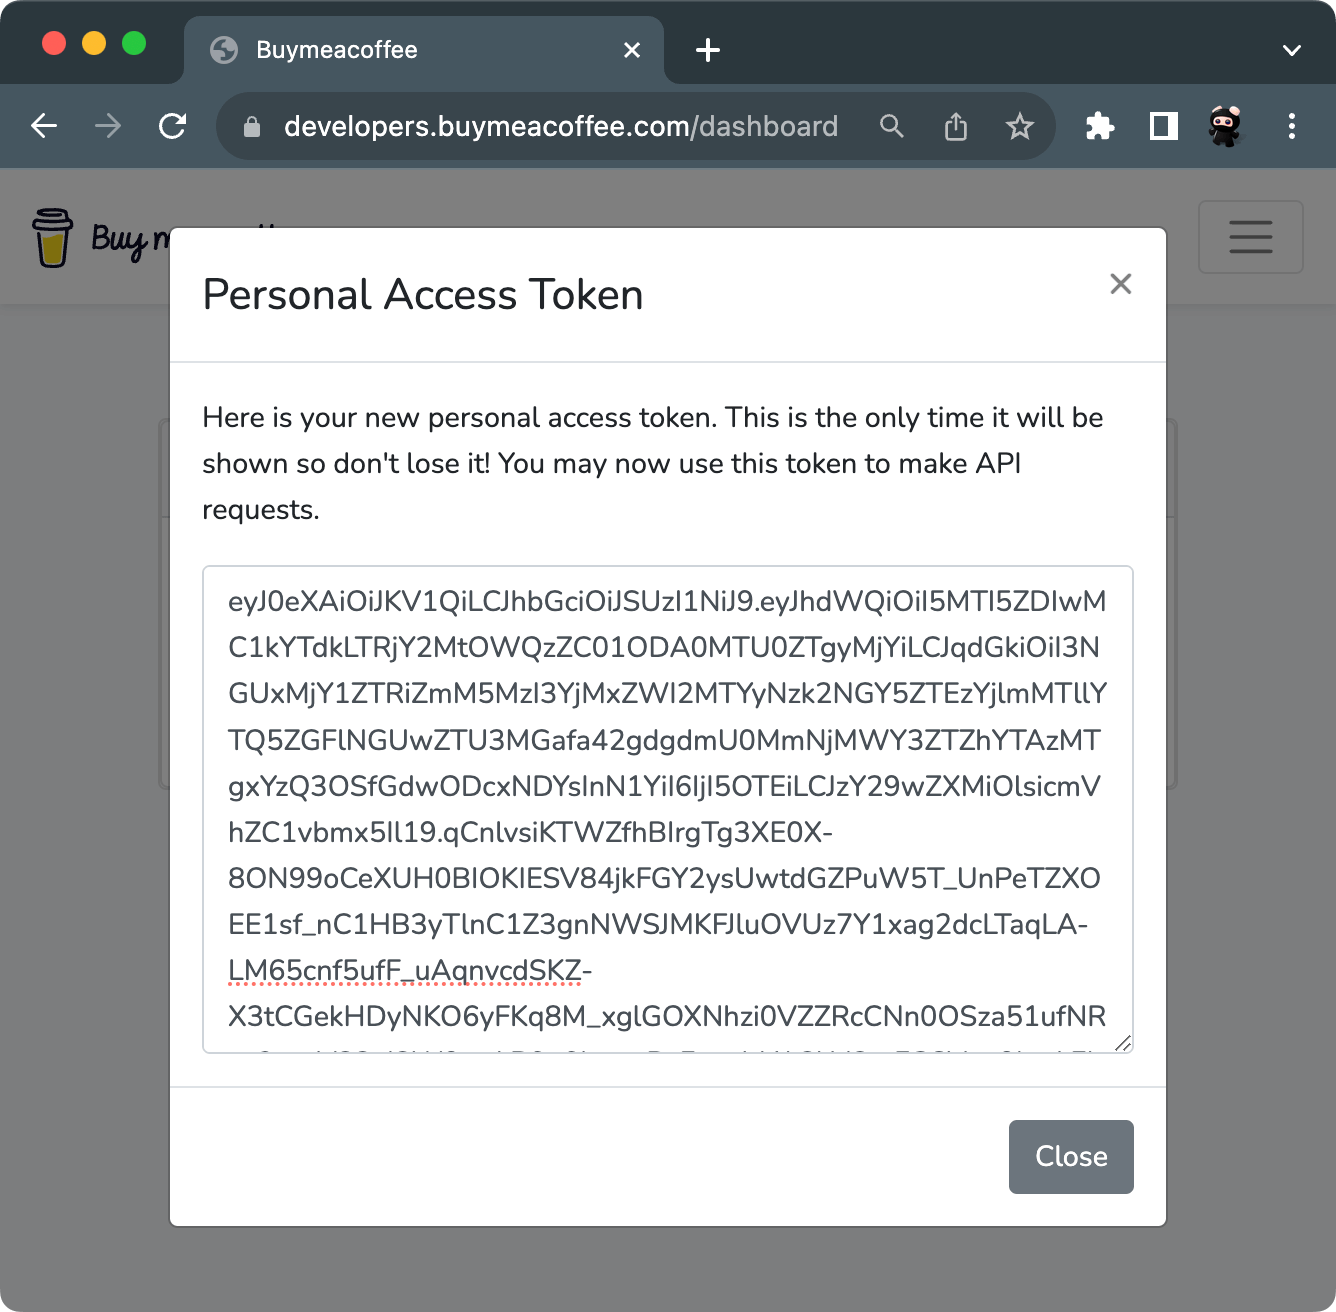 The generated Personal Access Token